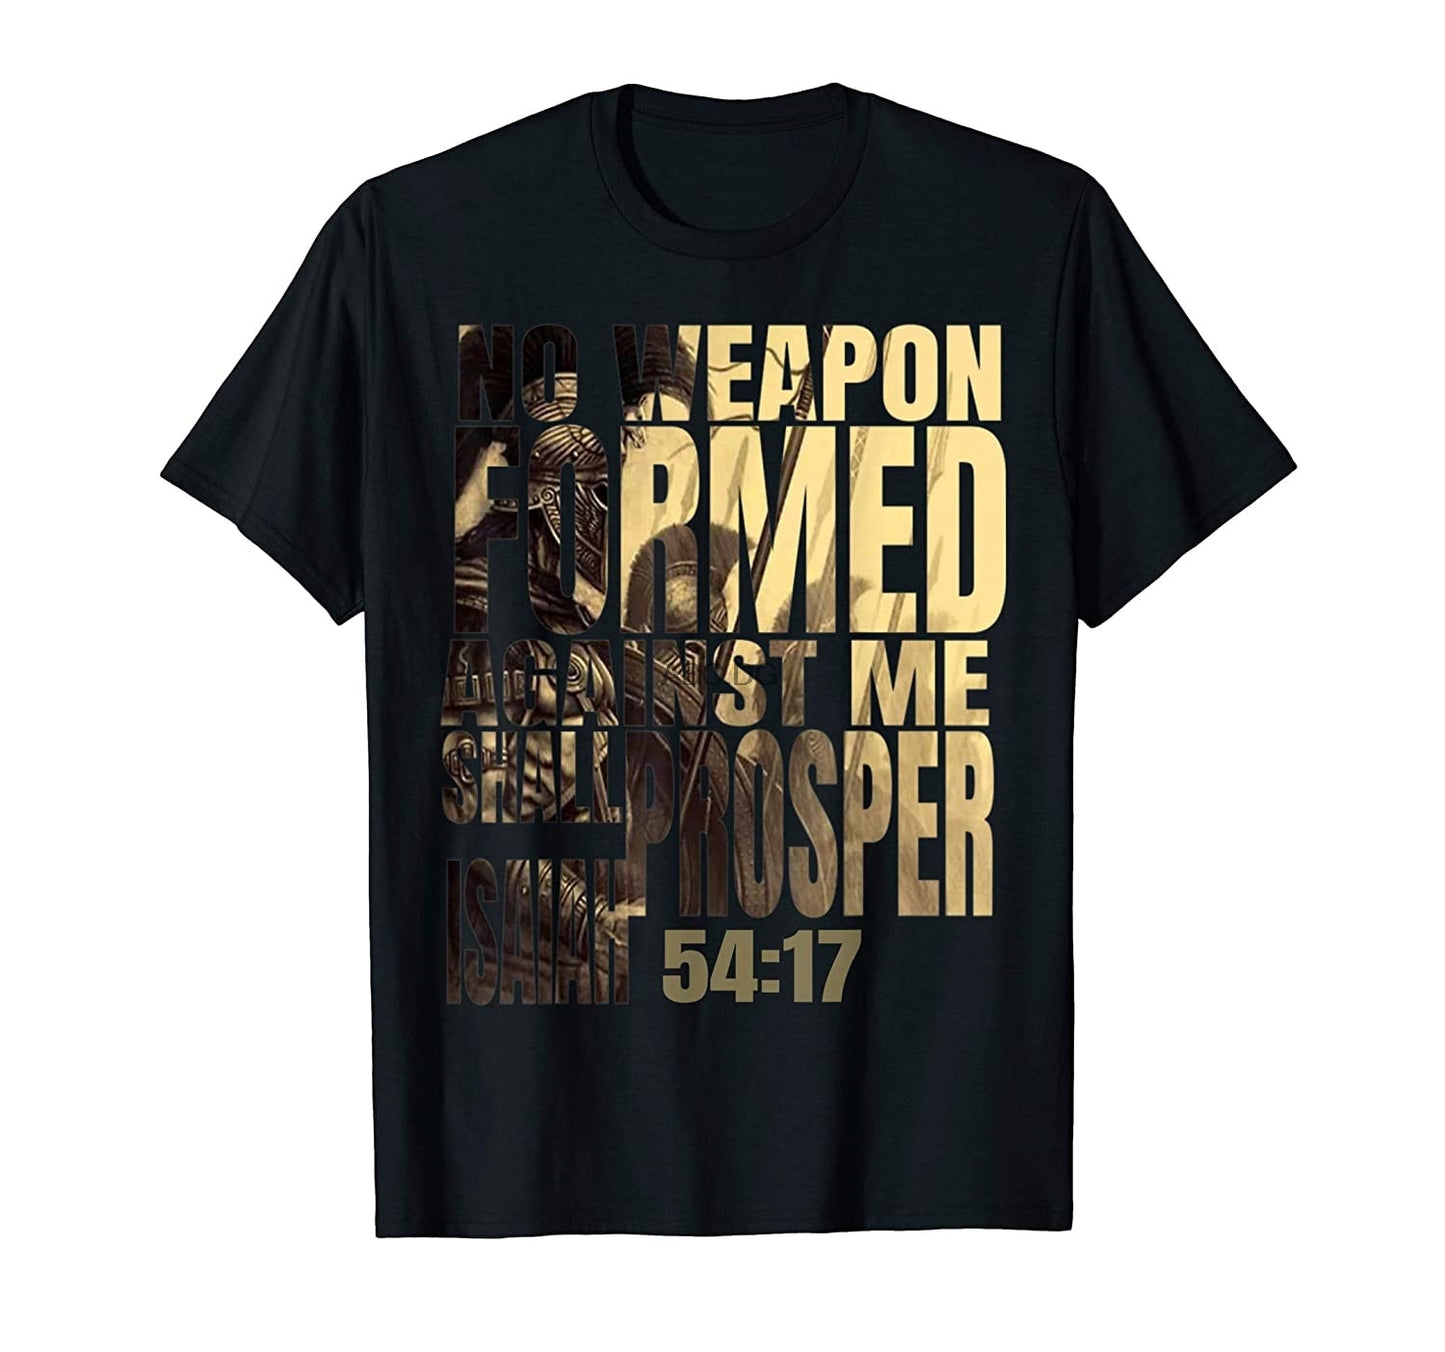 No Weapon Formed Against Me Shall Prosper T-Shirt